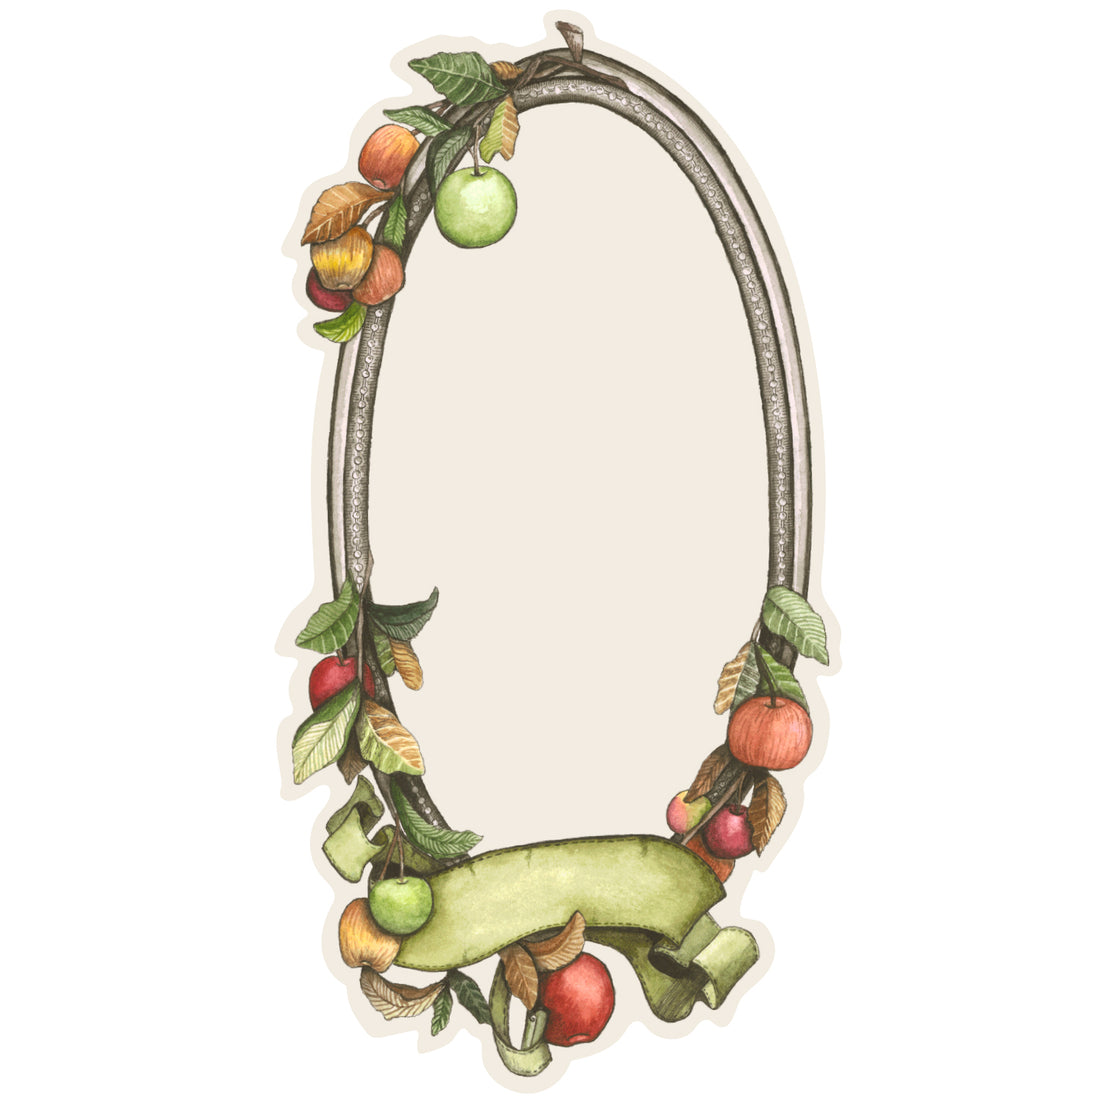 A white, die-cut oval card framed with a simple gray frame adorned with red, green and orange apples with green leaves, and a blank green ribbon unfurling along the bottom of the card. The blank white oval center and the green ribbon both provide ample space for personalization.